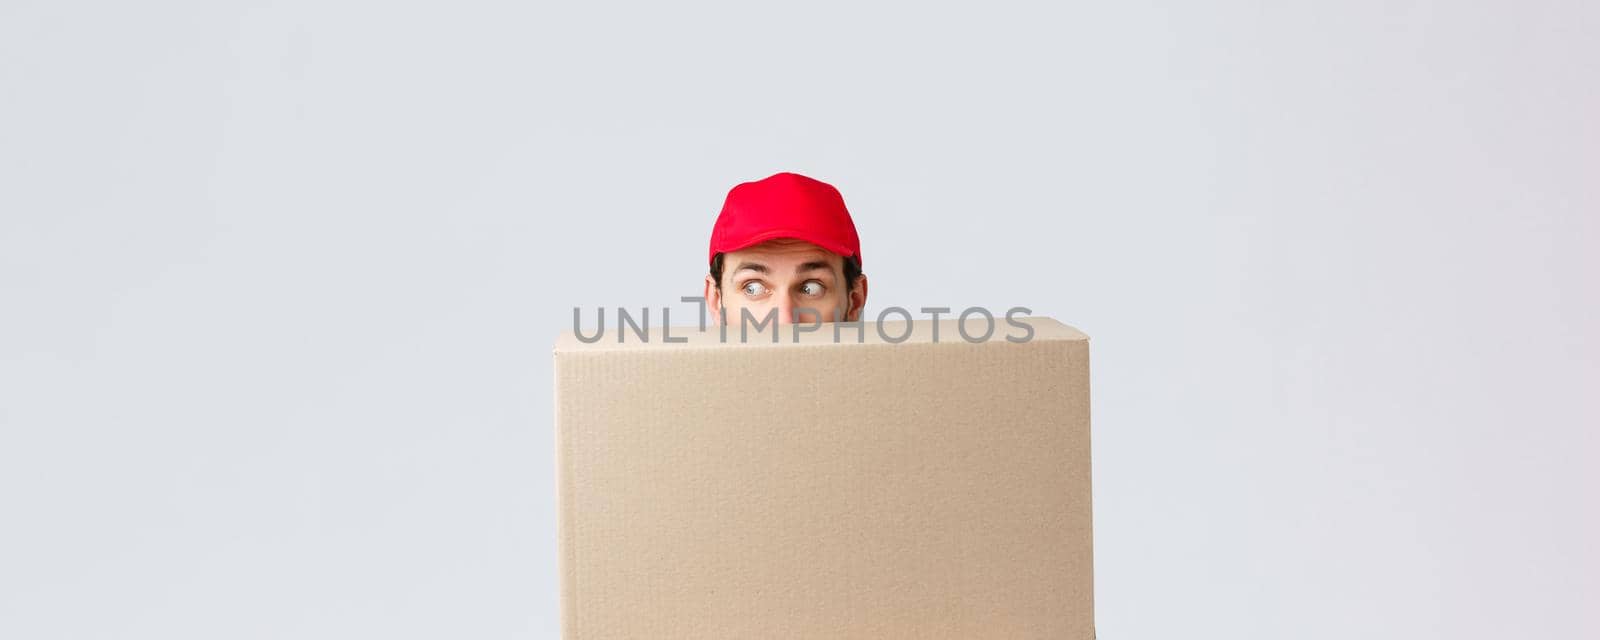 Packages and parcels delivery, covid-19 quarantine and transfer orders. Scared courier in red uniform cap, hiding behind customer order, looking left nervously, peeking at banner or advertisement by Benzoix